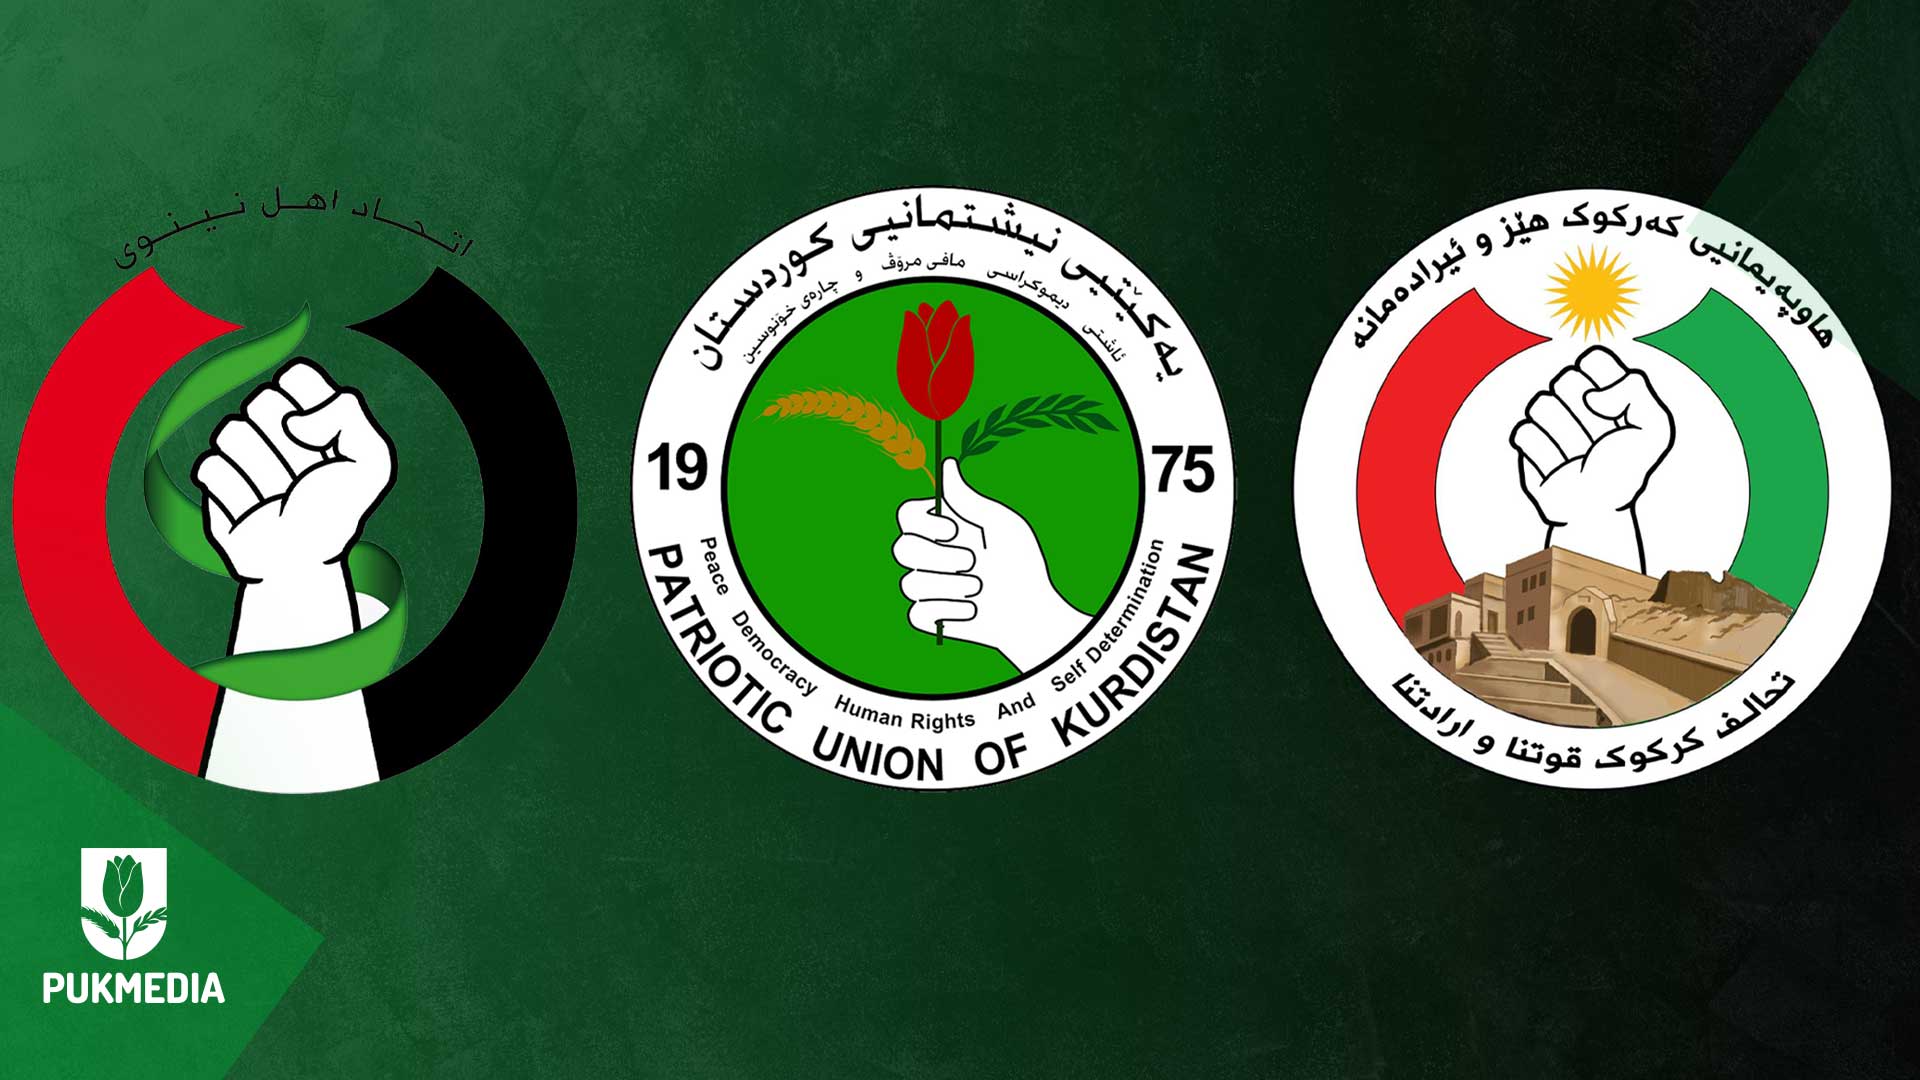 The logos of PUK's lists & Alliances for the upcoming Provincial Council Elections